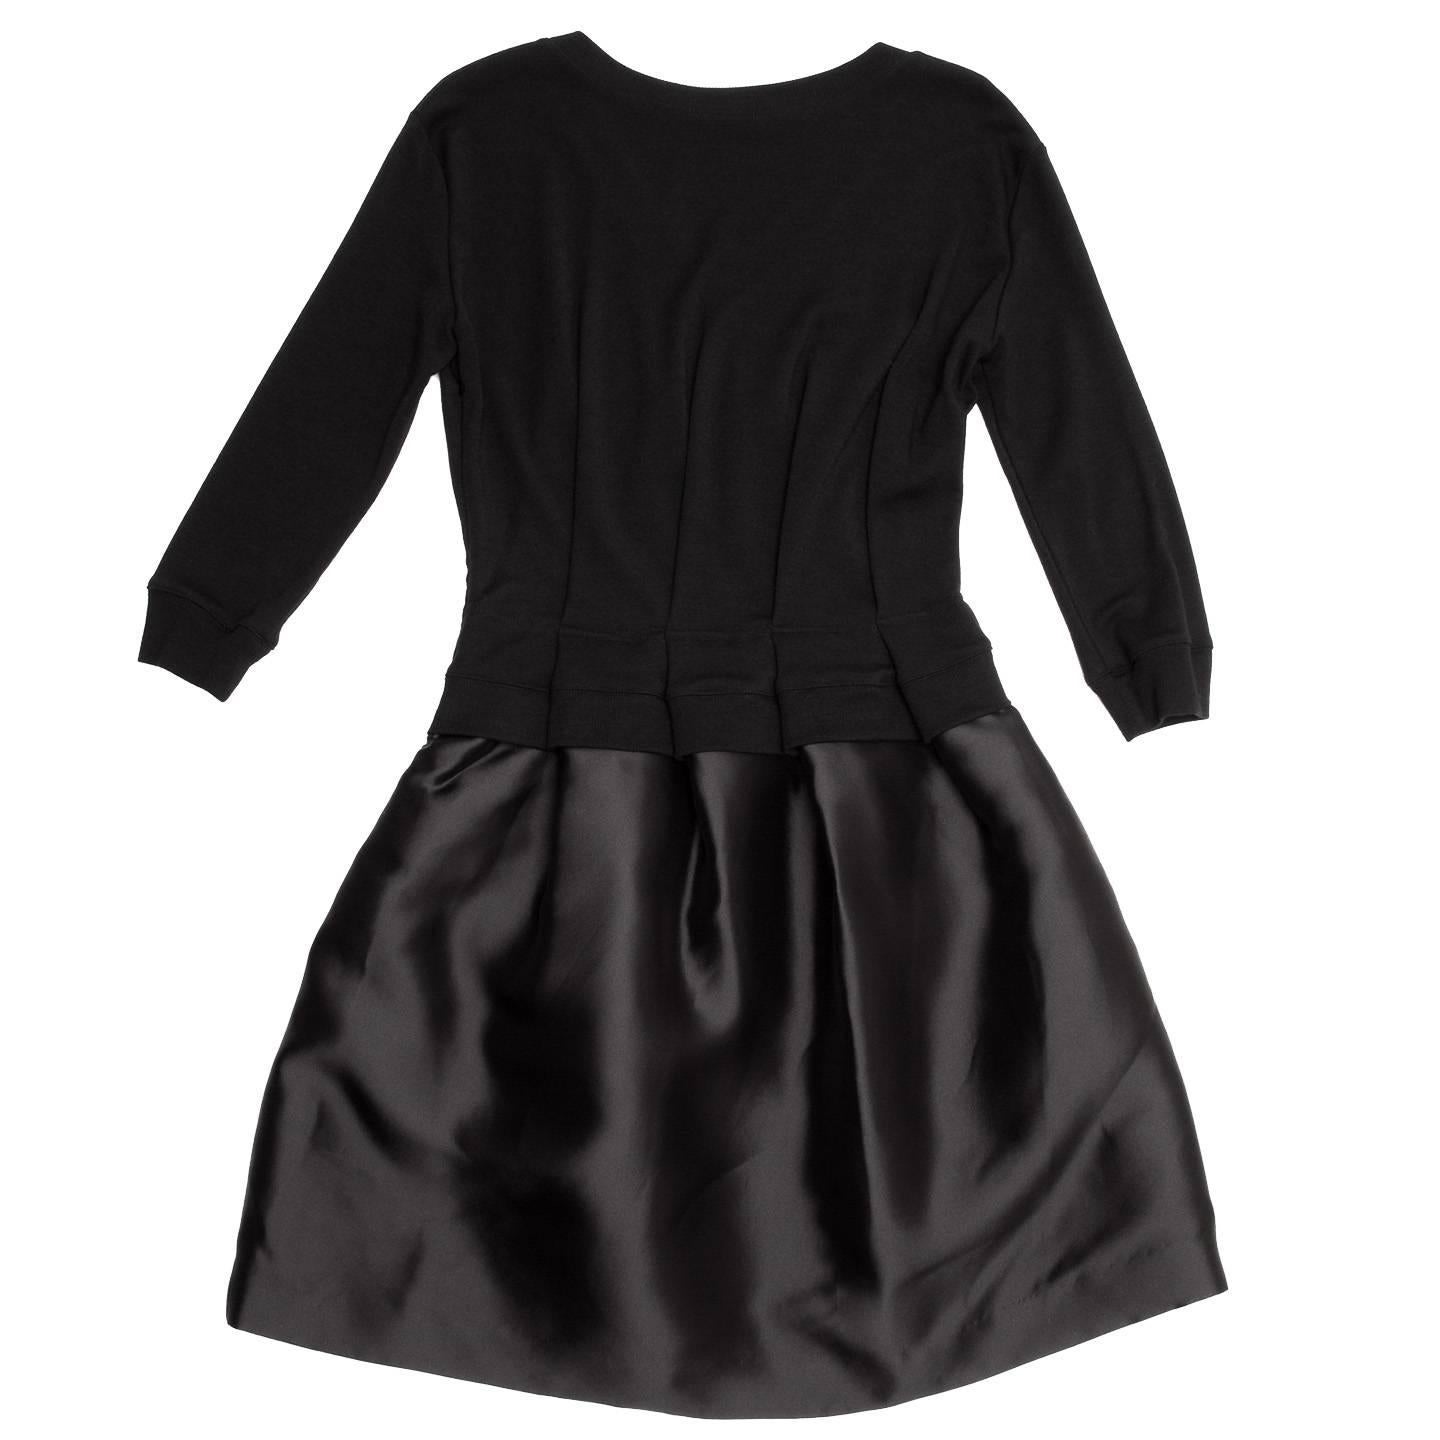 Viktor & Rolf Black Cocktail Style Dress In New Condition For Sale In Brooklyn, NY